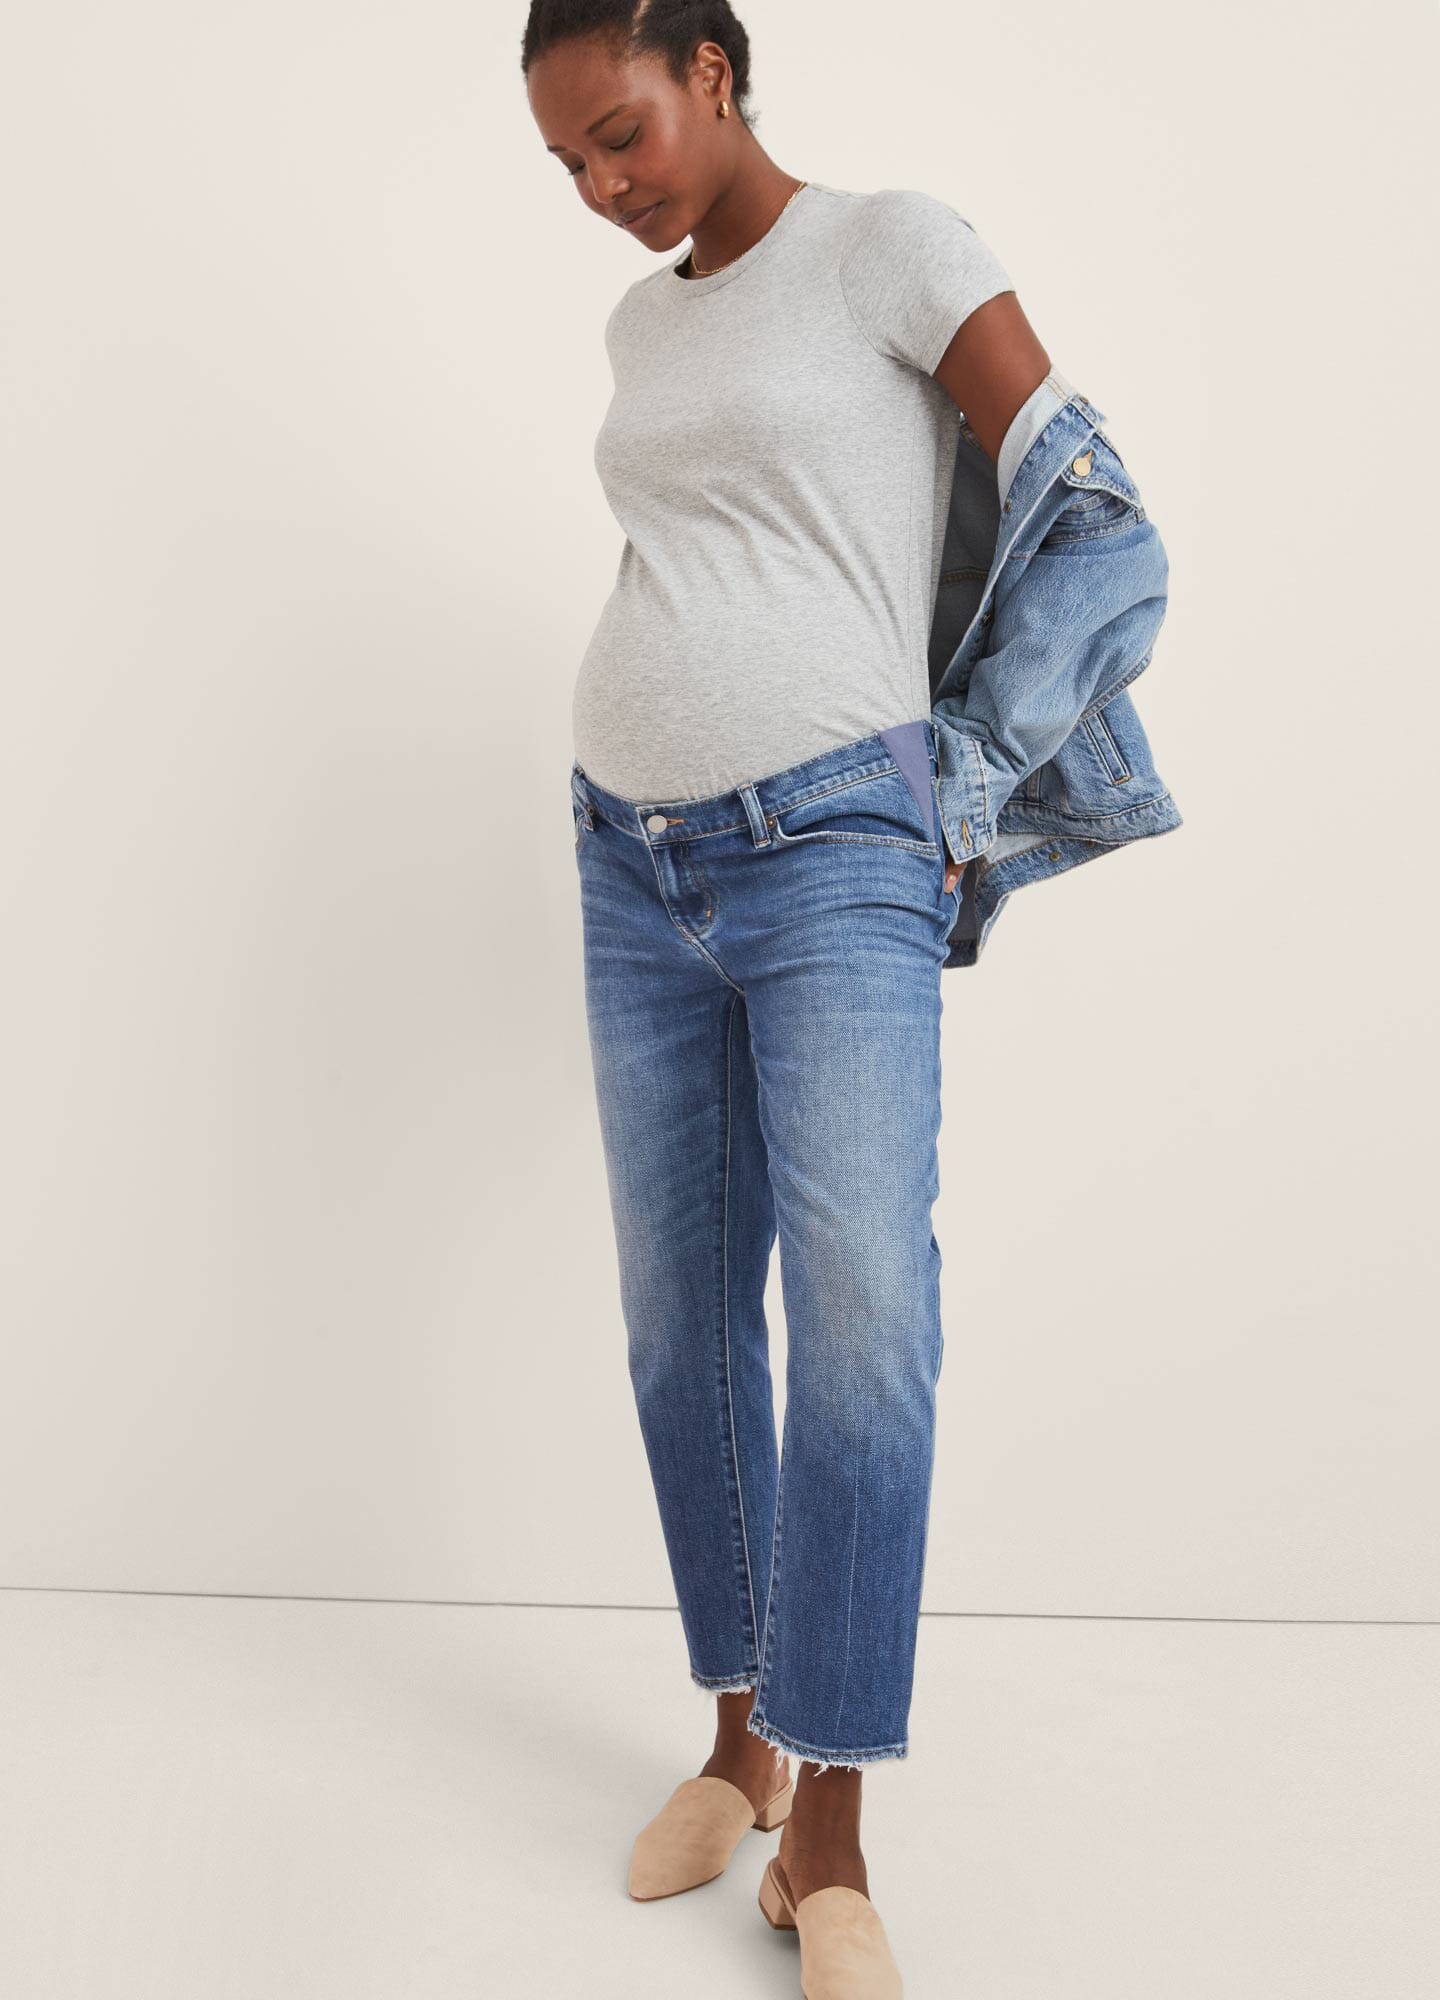 Stylish Maternity Jeans | HATCH Collection